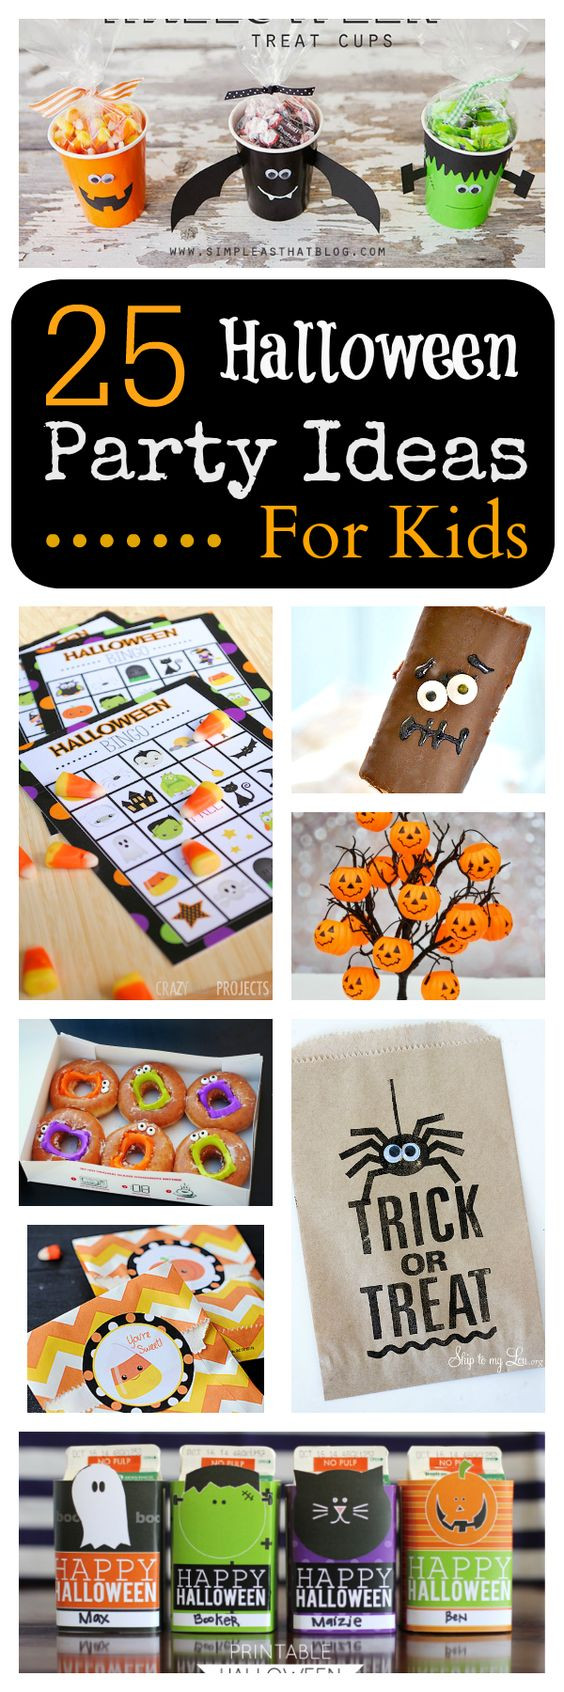 Kid Halloween Party Game Ideas
 25 School Halloween Party Ideas for Kids